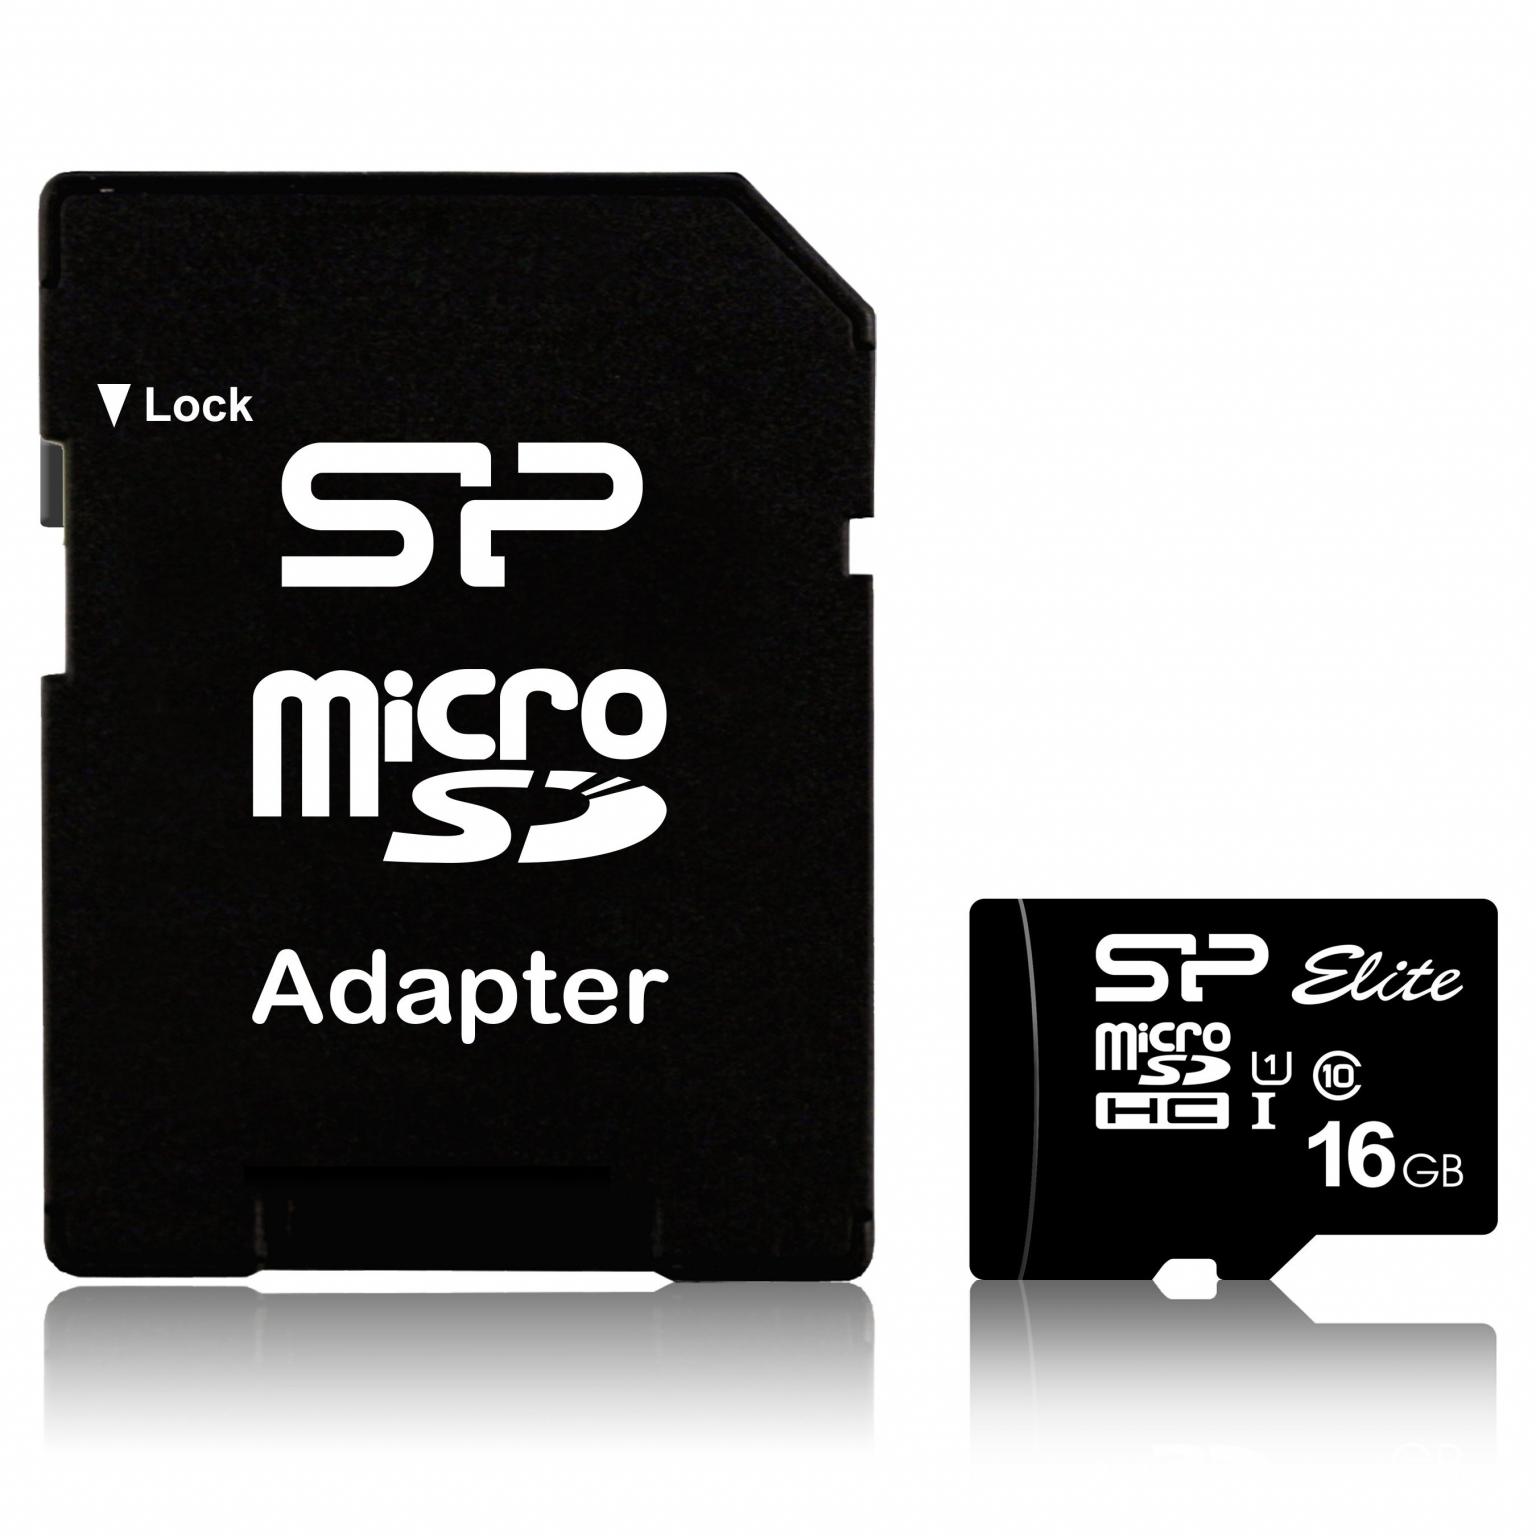 Micro SDHC geheugenkaart - 16 GB - Silicon Power